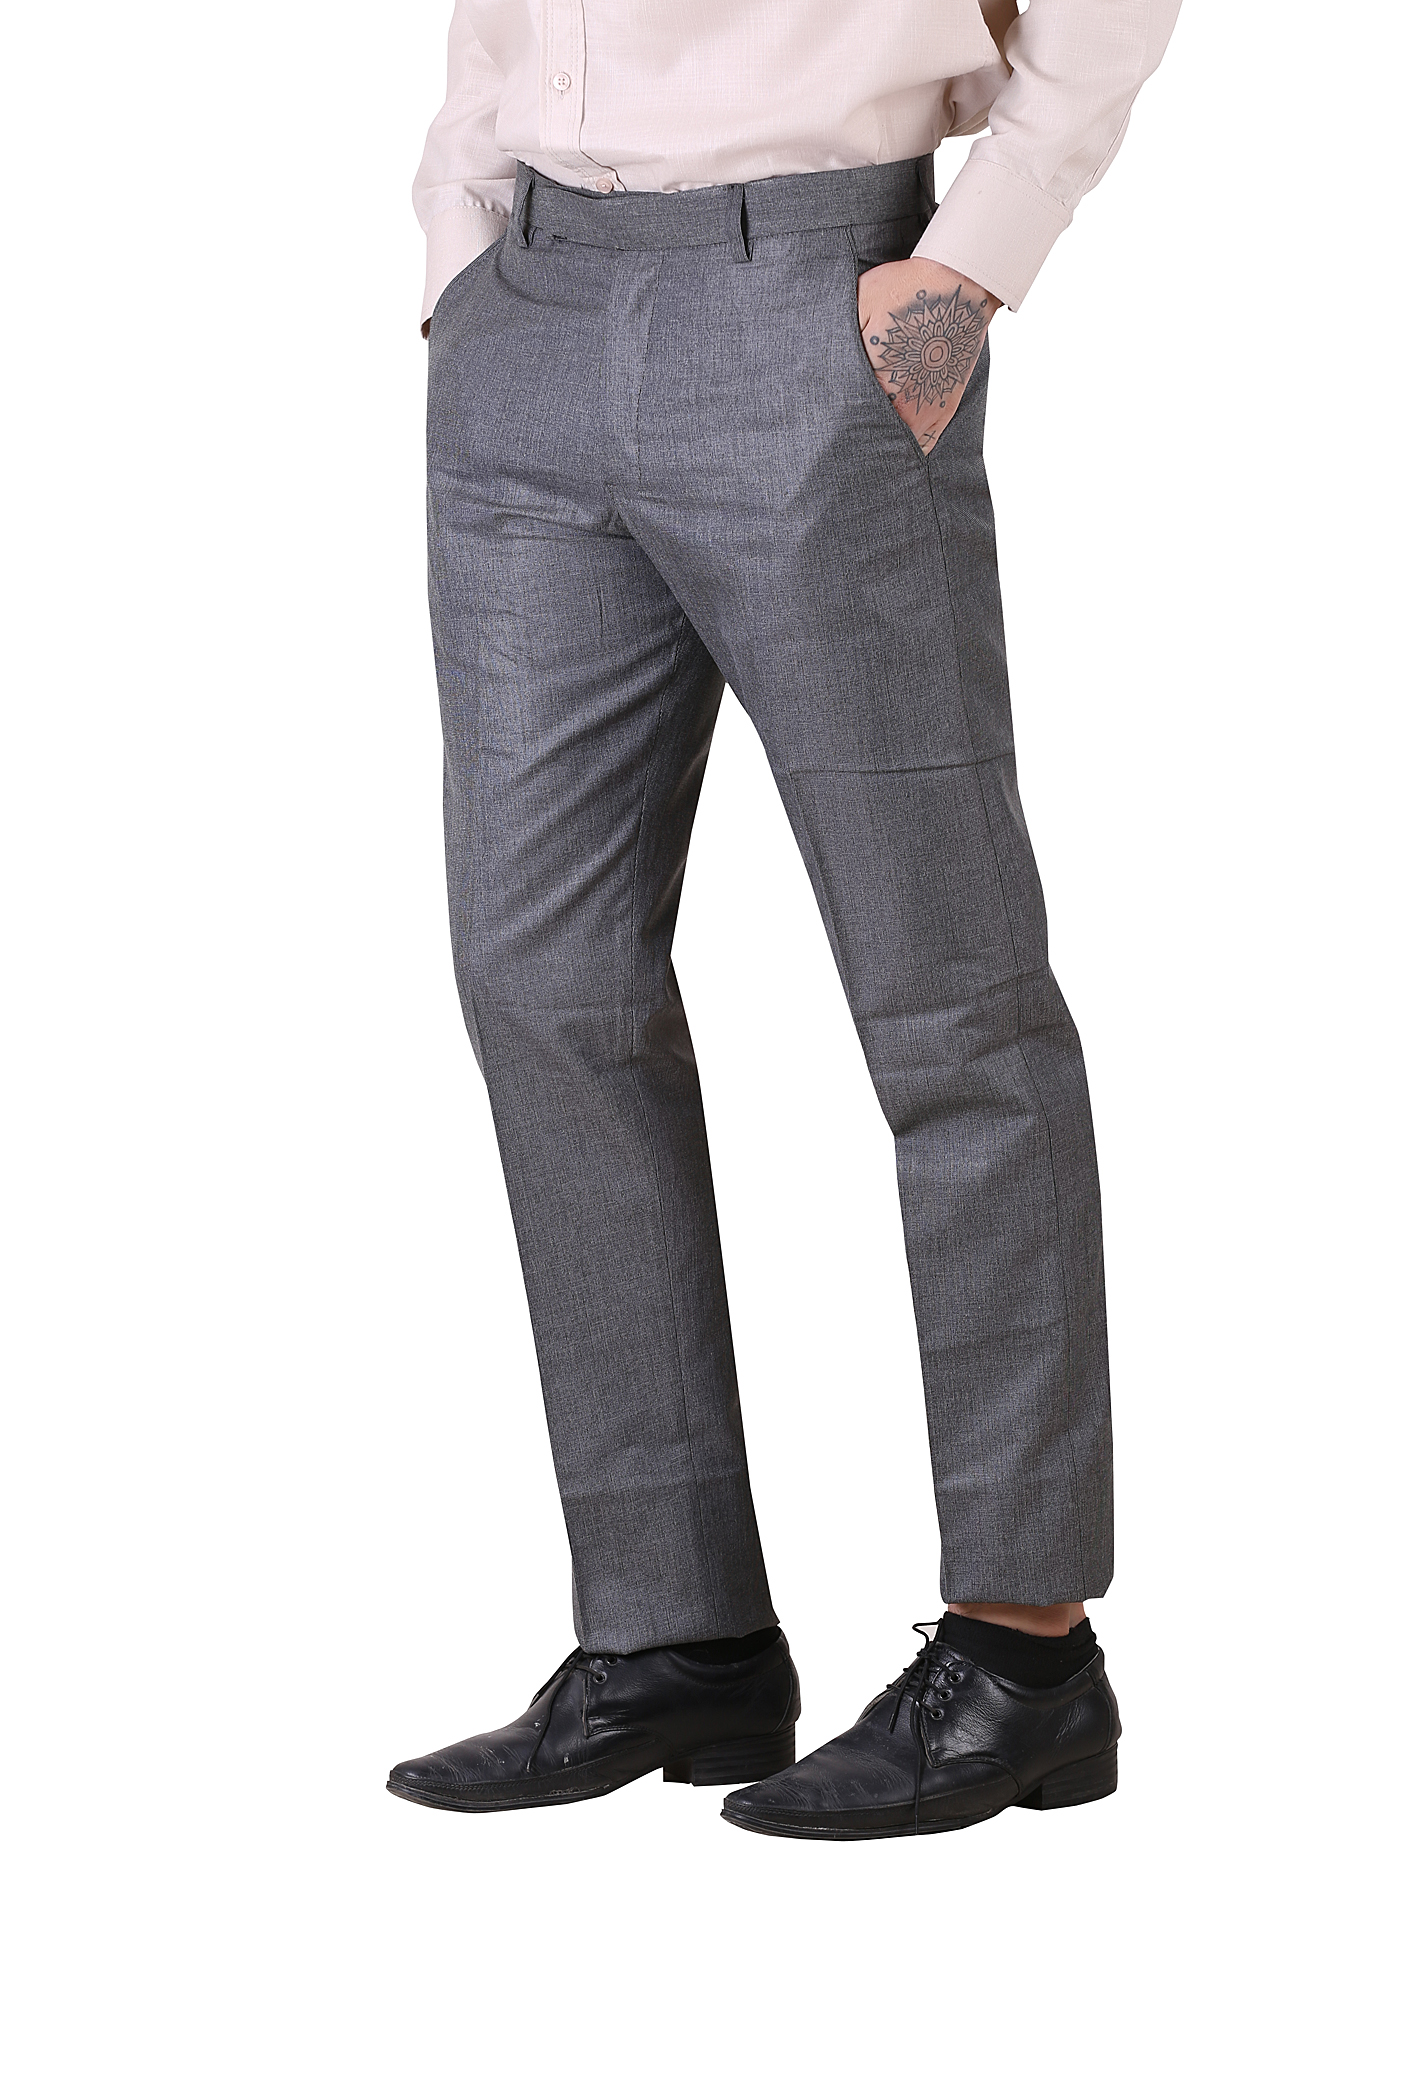 Buy Basic Poly Cotton Casual Trouser For Men Online @ ₹1000 from ShopClues